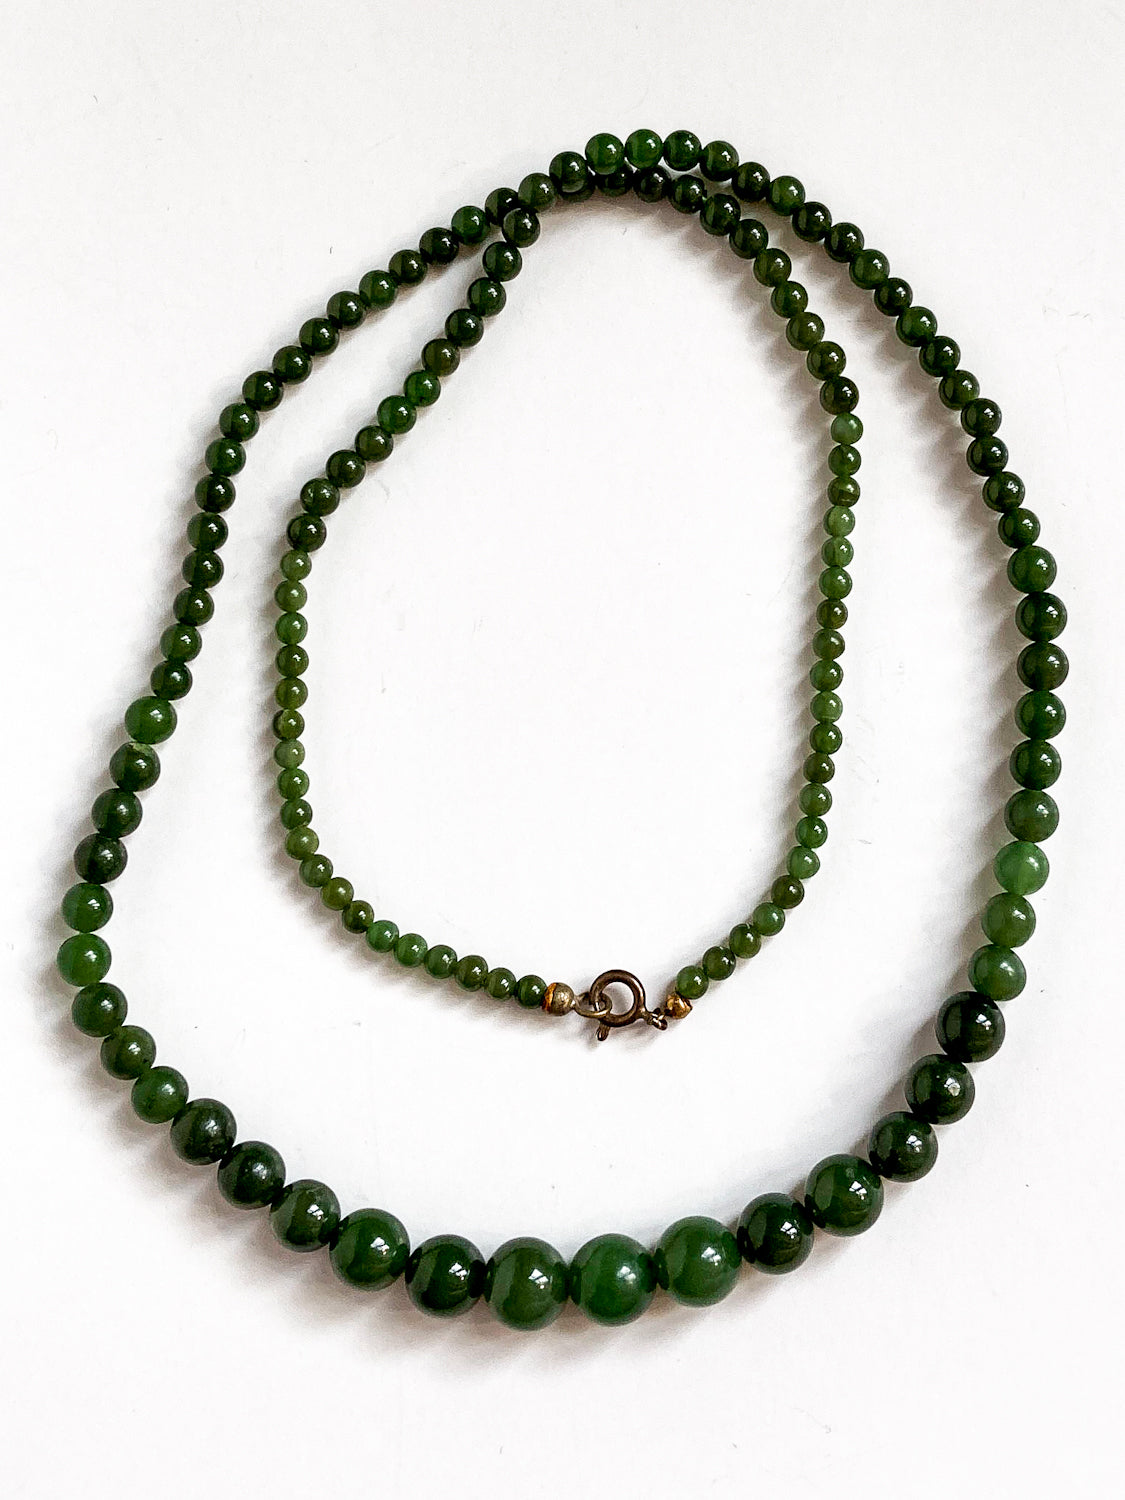 Vintage Graduated Green Nephrite Stone Bead Elongated Necklace full necklace doubled